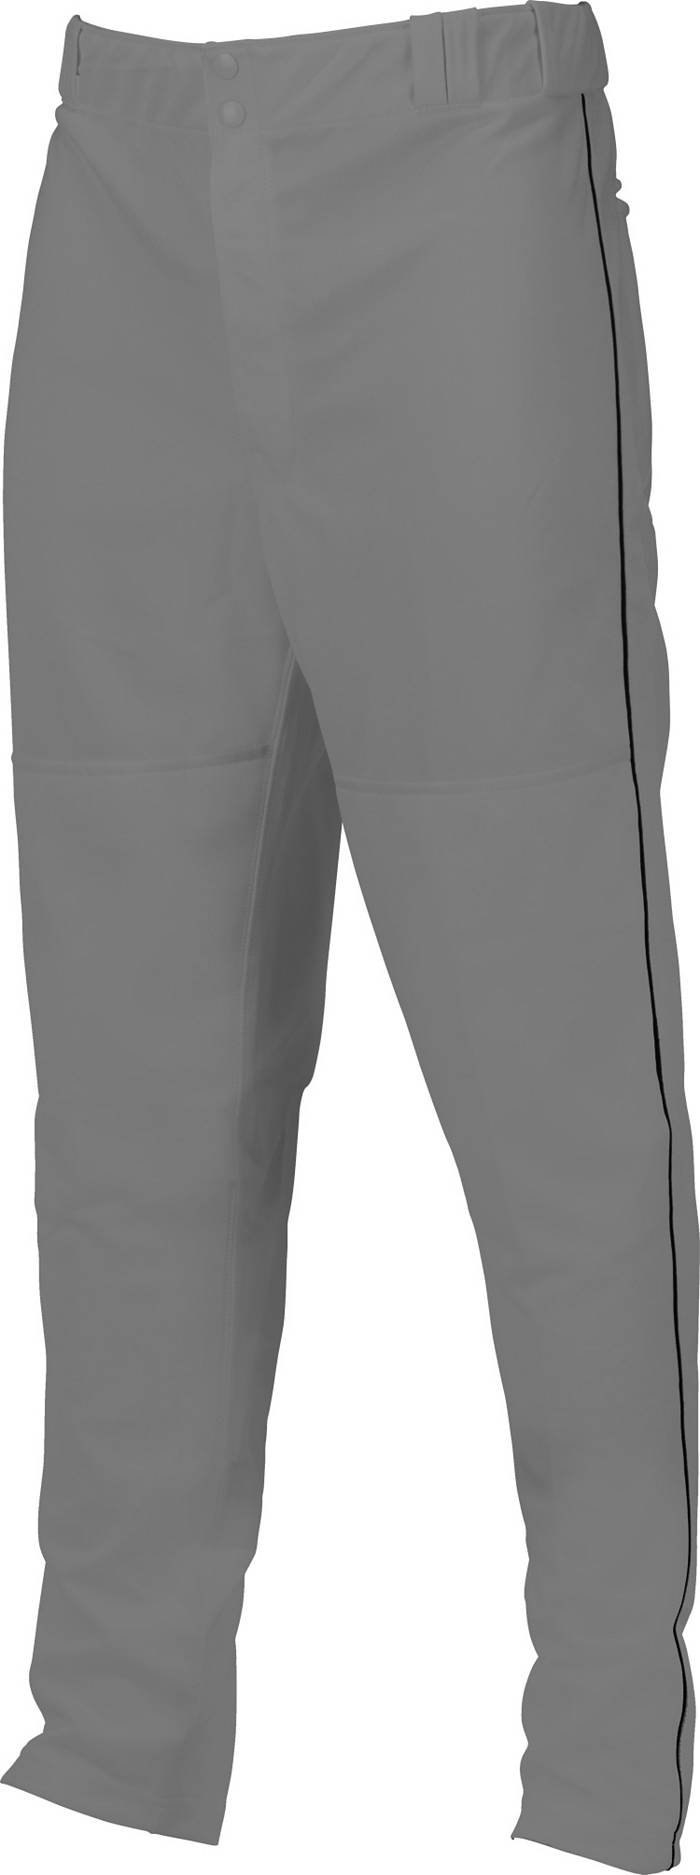  Marucci Sports - Tapered Double-Knit Piped Pant White